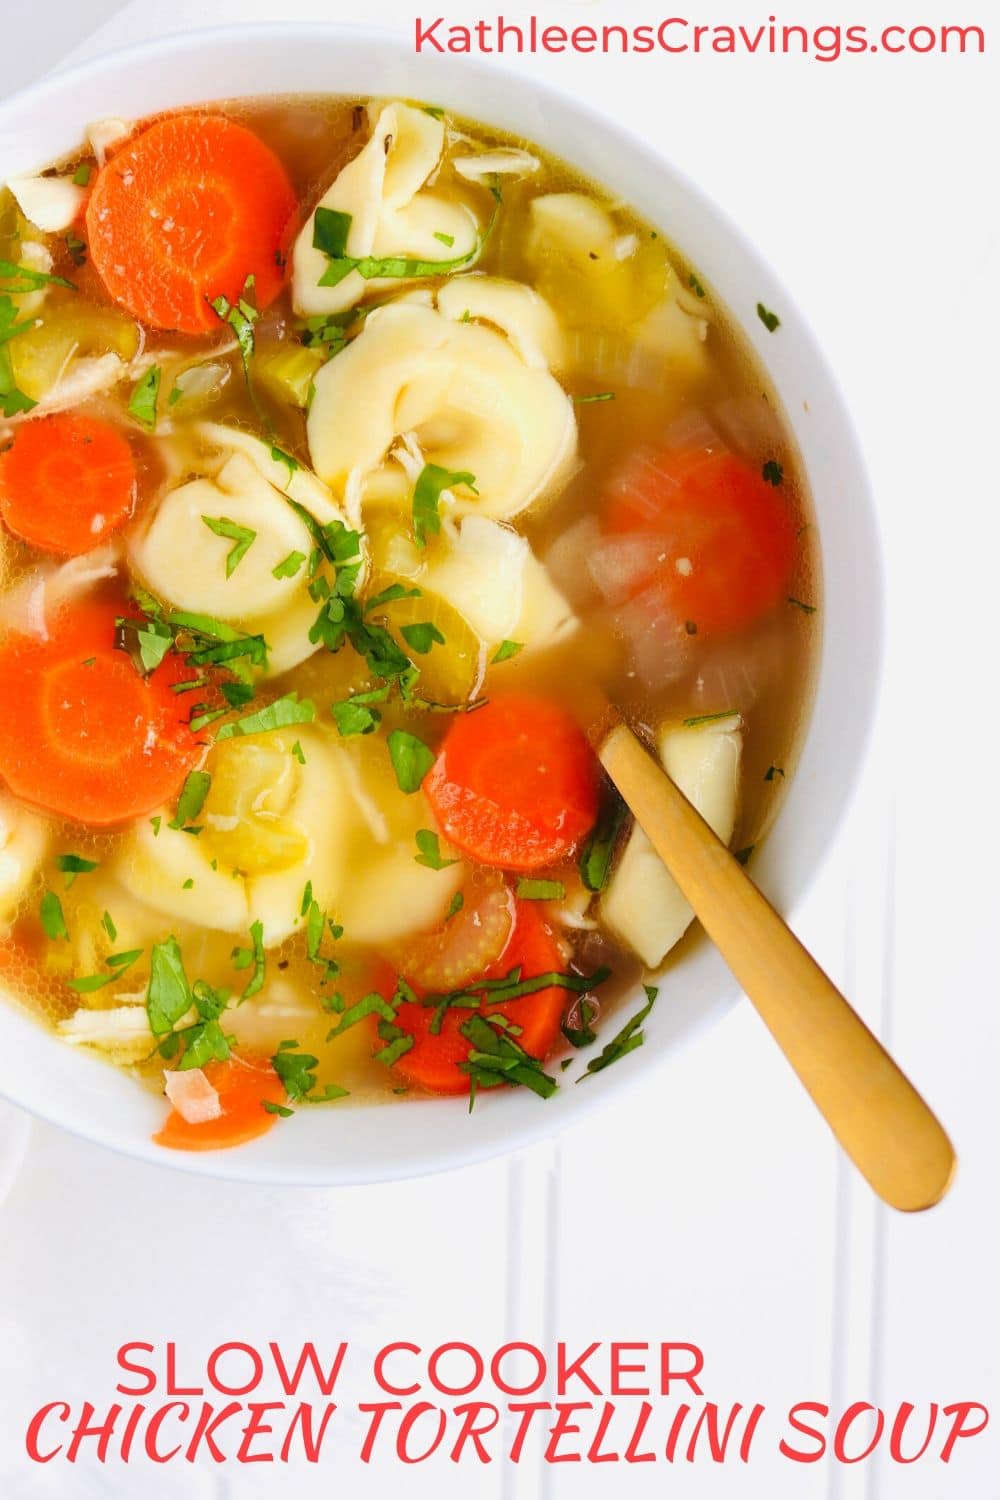 Slow Cooker Chicken Tortellini Soup with text